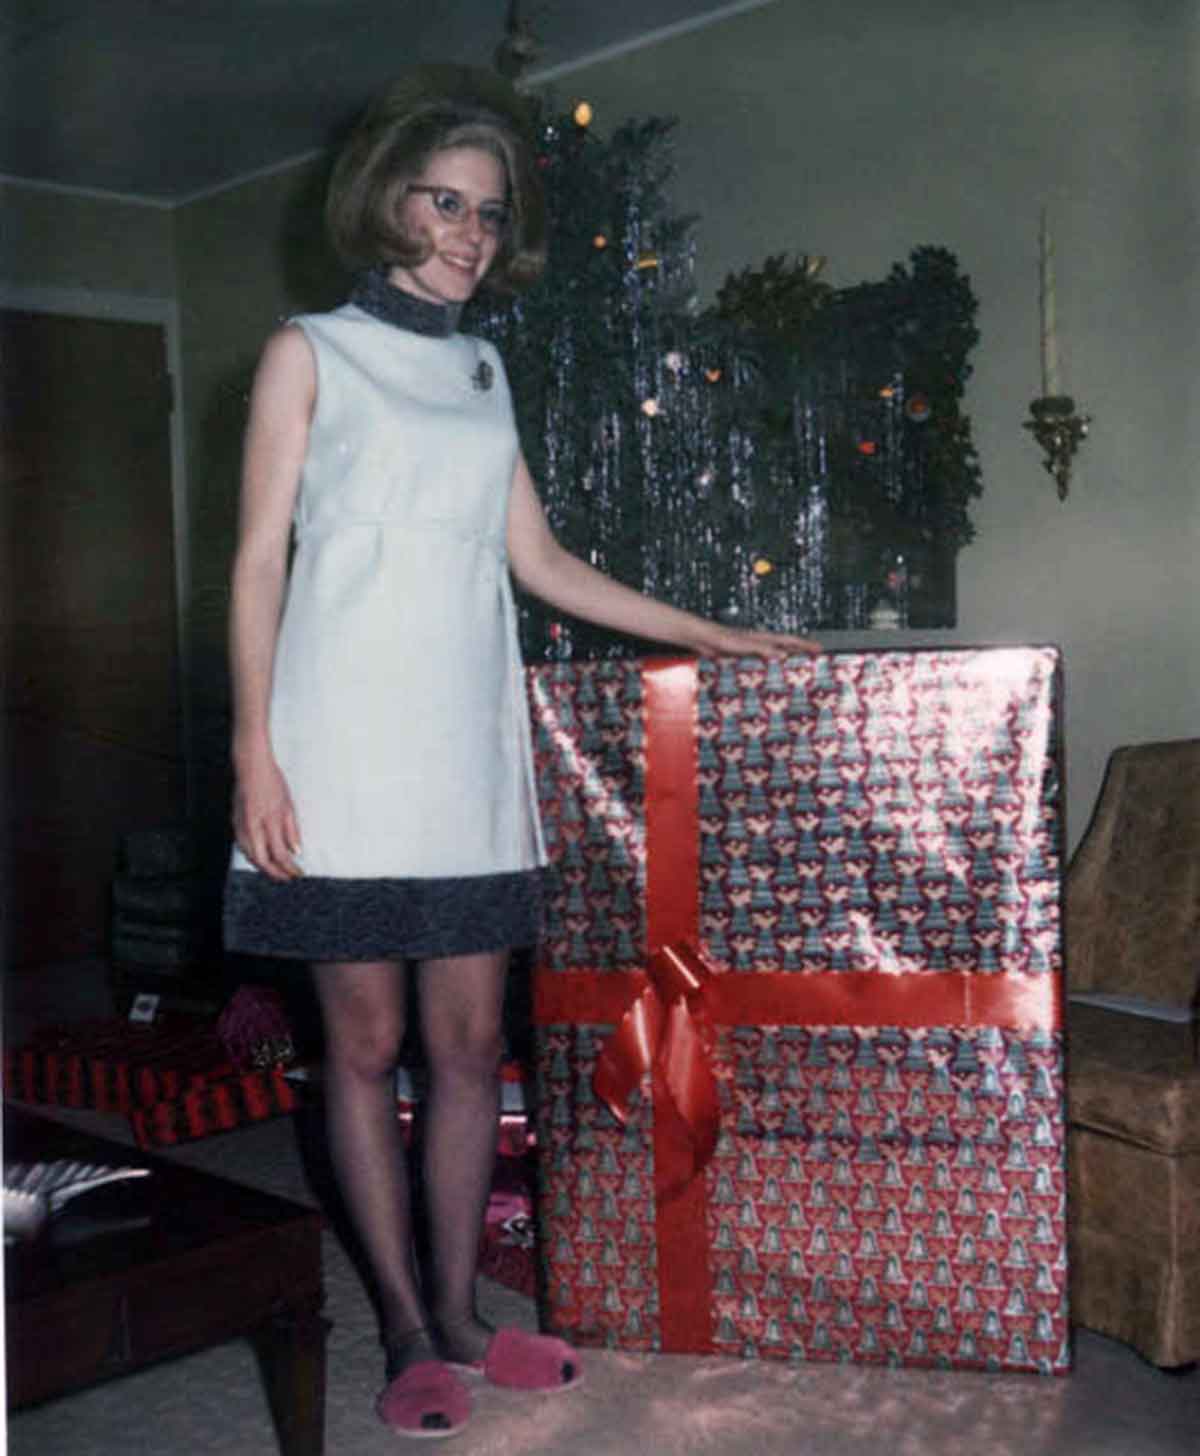 straight from the 60s - Photos of 20th Century Women at Christmas